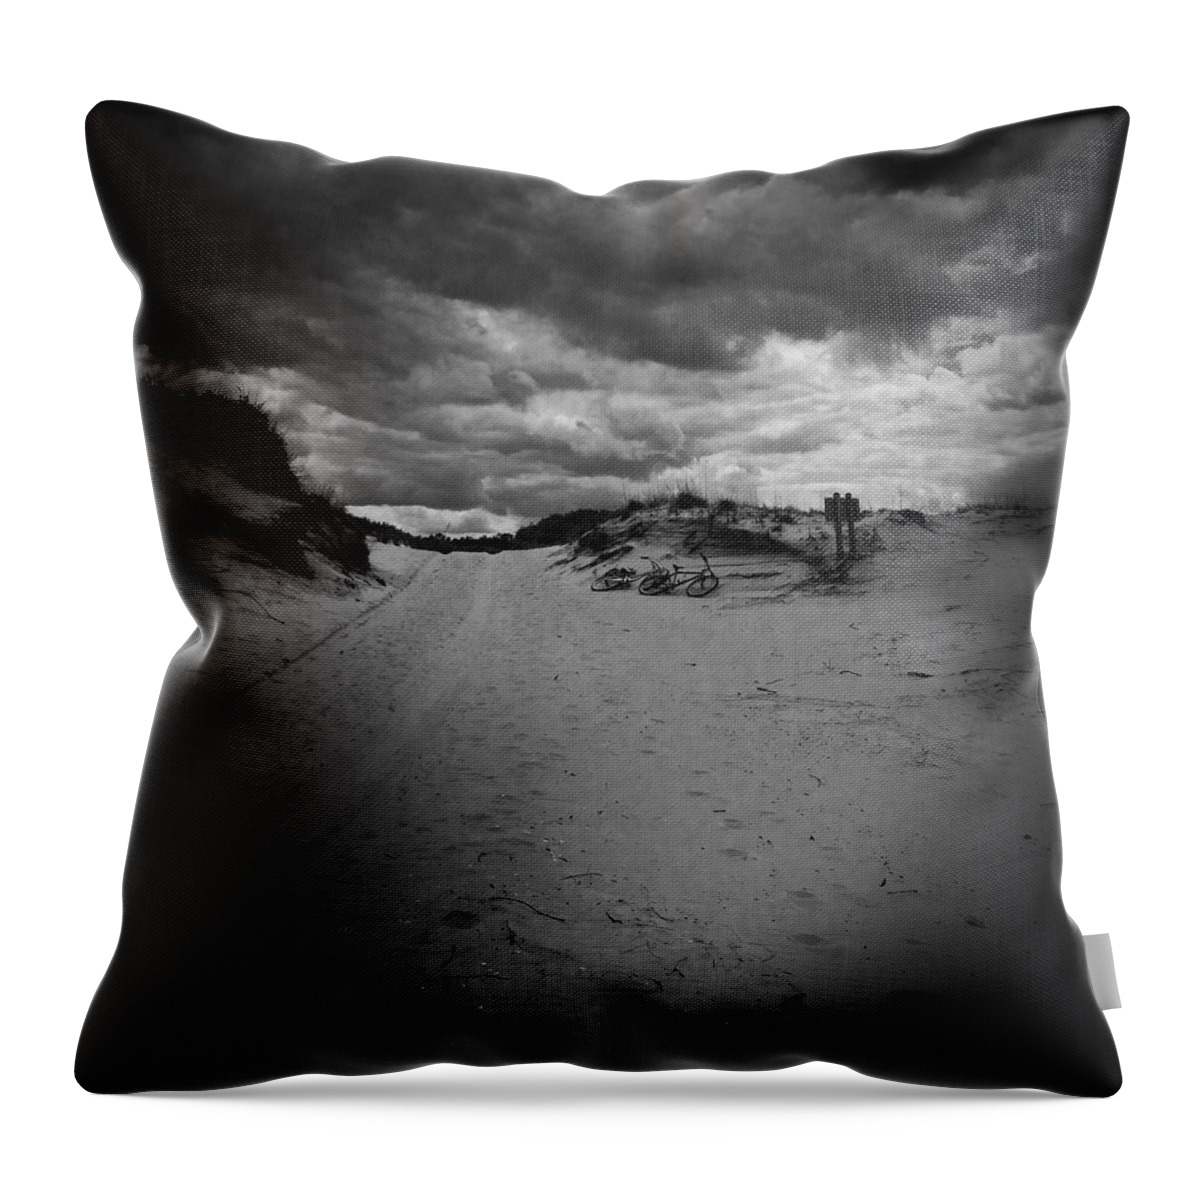 Black And White Throw Pillow featuring the photograph Cloudy Skies for a Bike Ride by Lisa Burbach